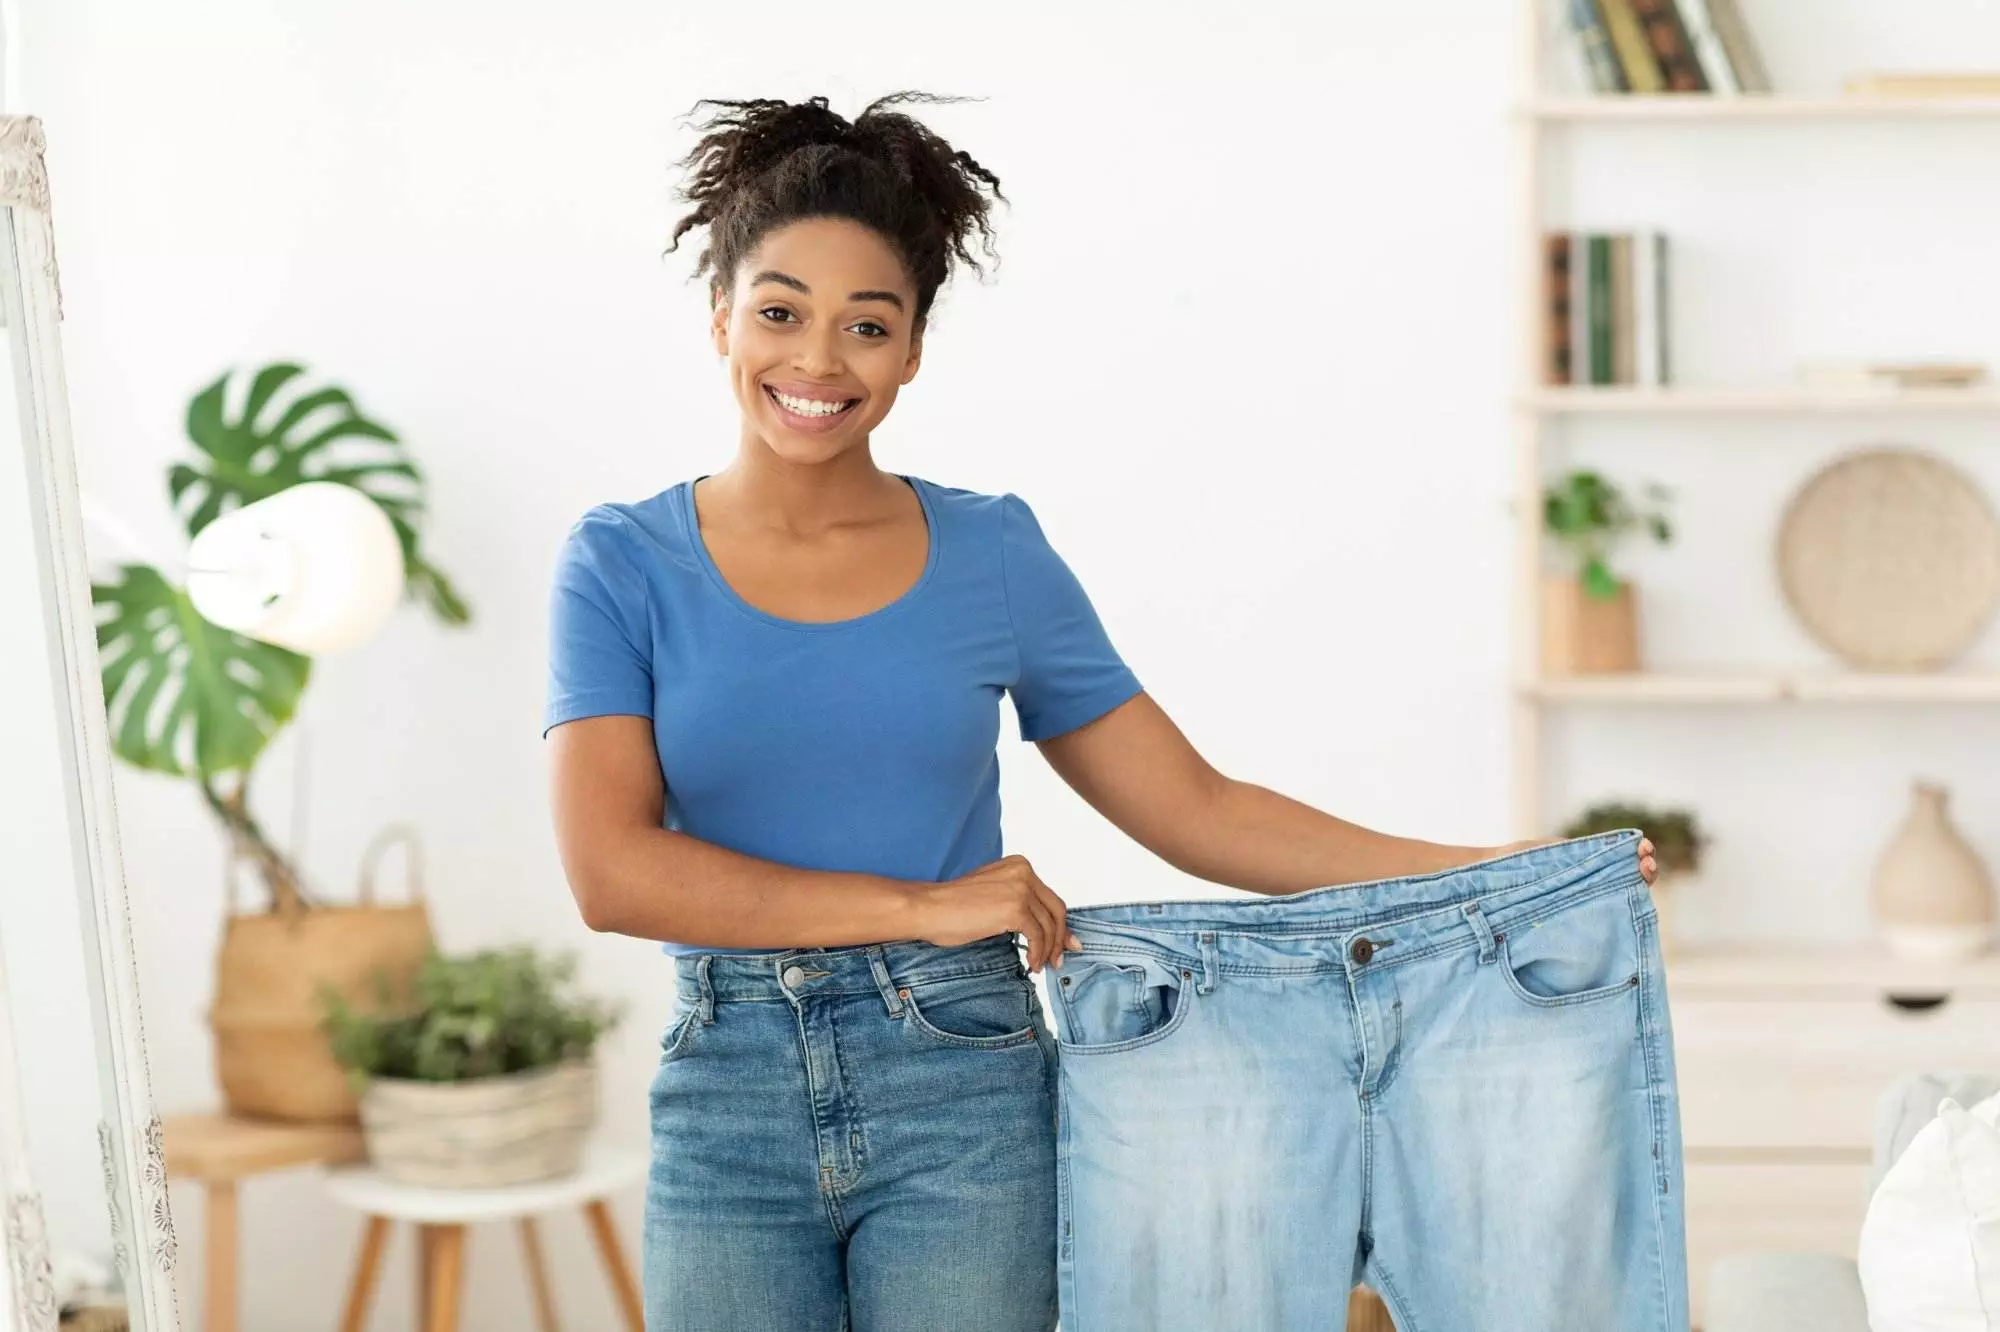 Woman showing weight loss by holding large jeans.